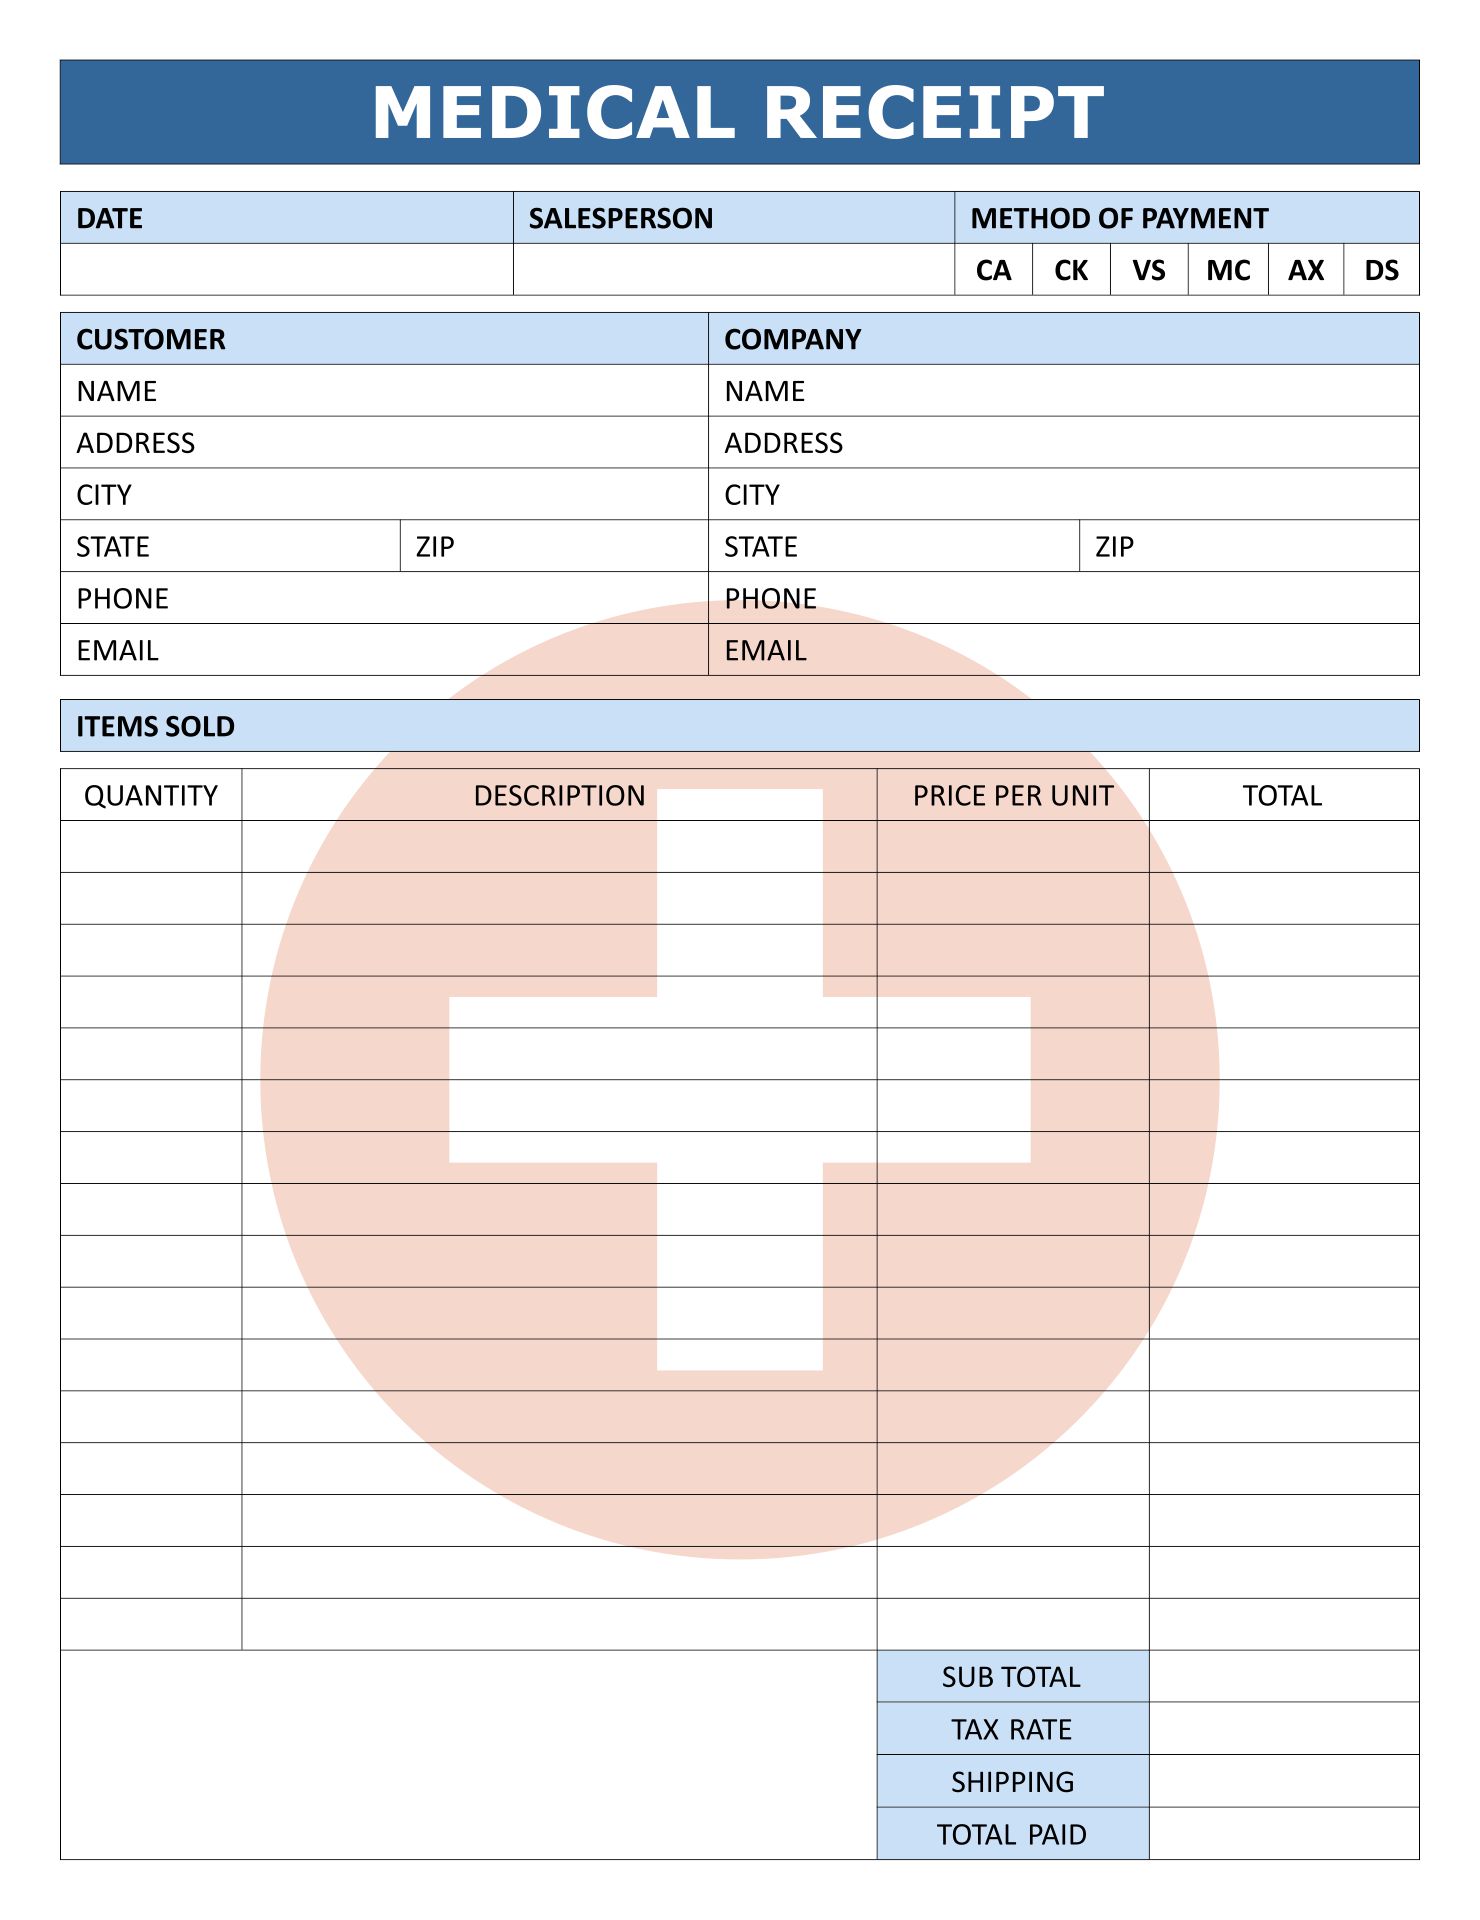 6-best-images-of-free-printable-medical-receipts-medical-payment-receipt-template-printable